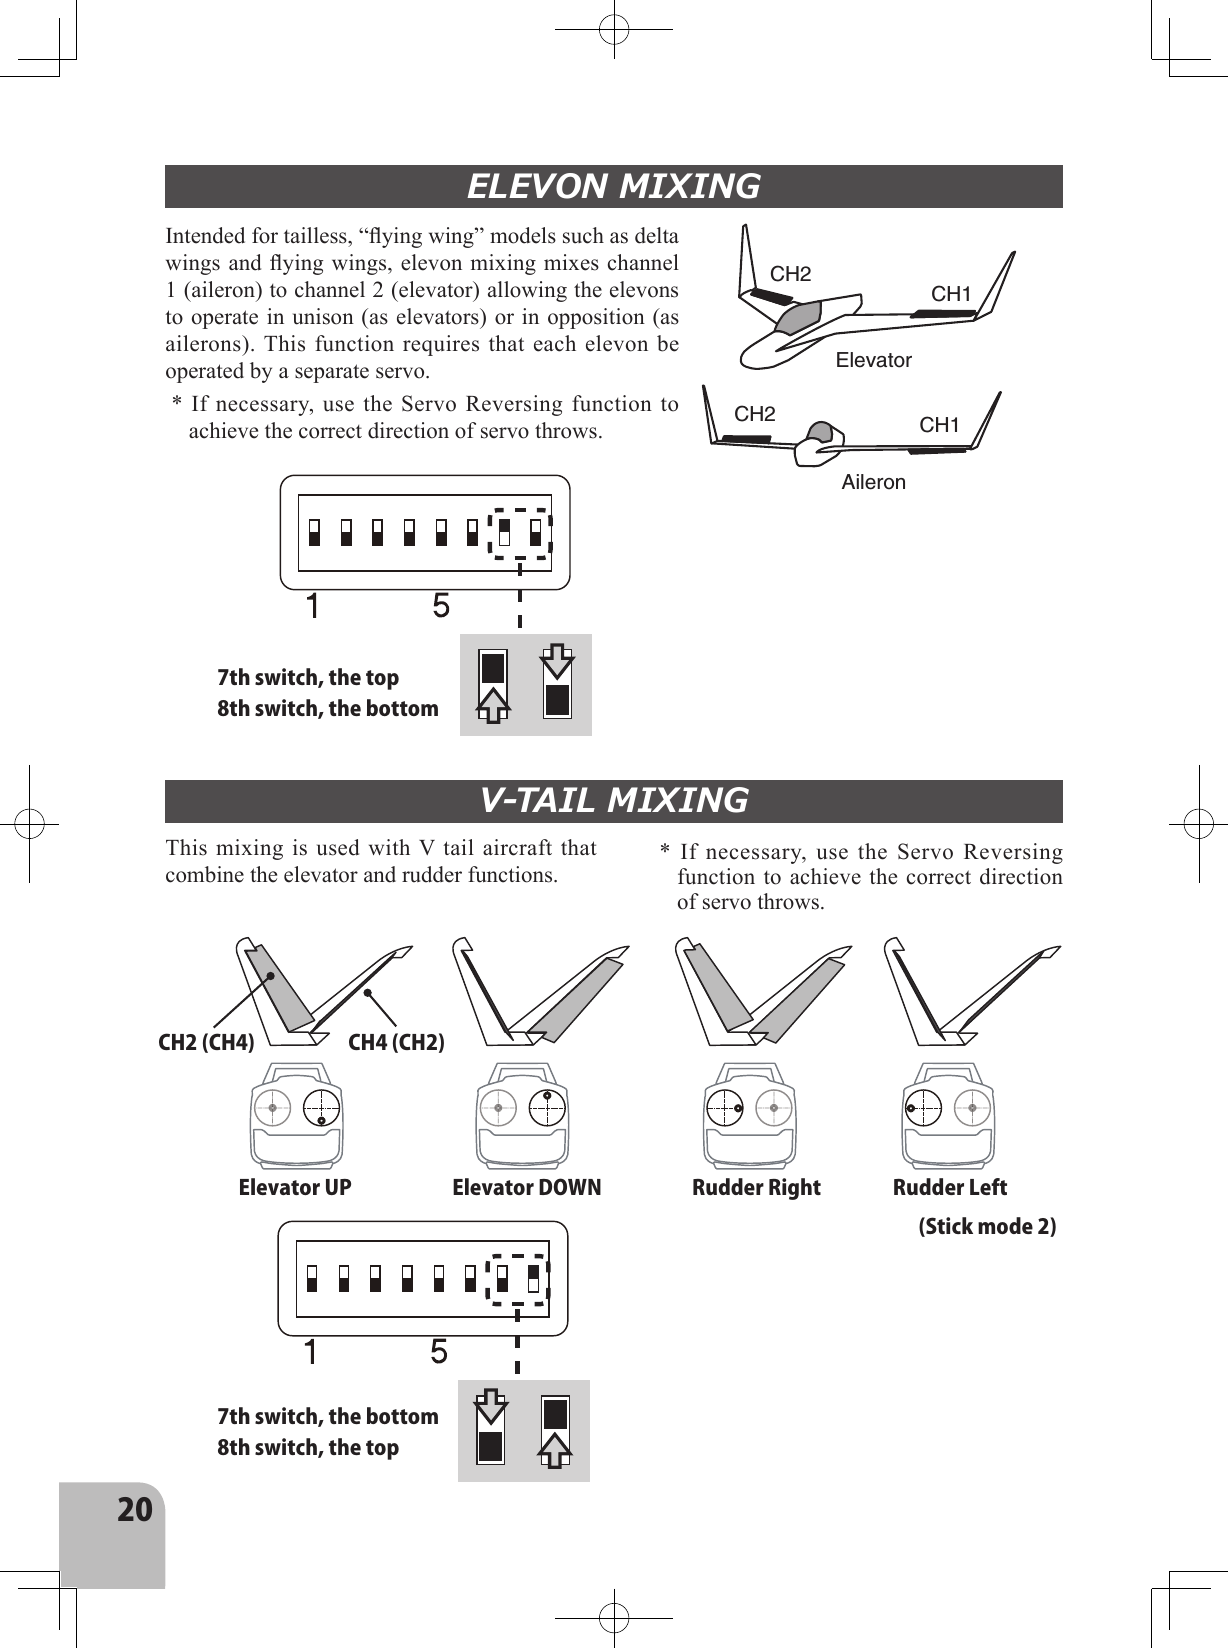 20ELEVON MIXINGV-TAIL MIXING7th switch, the top8th switch, the bottom7th switch, the bottom8th switch, the topCH1CH1CH2CH2ElevatorAileronCH4 (CH2)Intended for tailless, “ying wing” models such as delta wings and ying wings, elevon mixing mixes channel 1 (aileron) to channel 2 (elevator) allowing the elevons to operate in unison (as elevators) or in opposition (as ailerons). This function requires that each  elevon be operated by a separate servo.* If necessary,  use the Servo  Reversing function to achieve the correct direction of servo throws.*  If  necessary,  use  the  Servo  Reversing function to achieve the correct direction of servo throws.This mixing  is used with V tail  aircraft that combine the elevator and rudder functions.Elevator UP Elevator DOWN Rudder Right Rudder Left (Stick mode 2)CH2 (CH4)